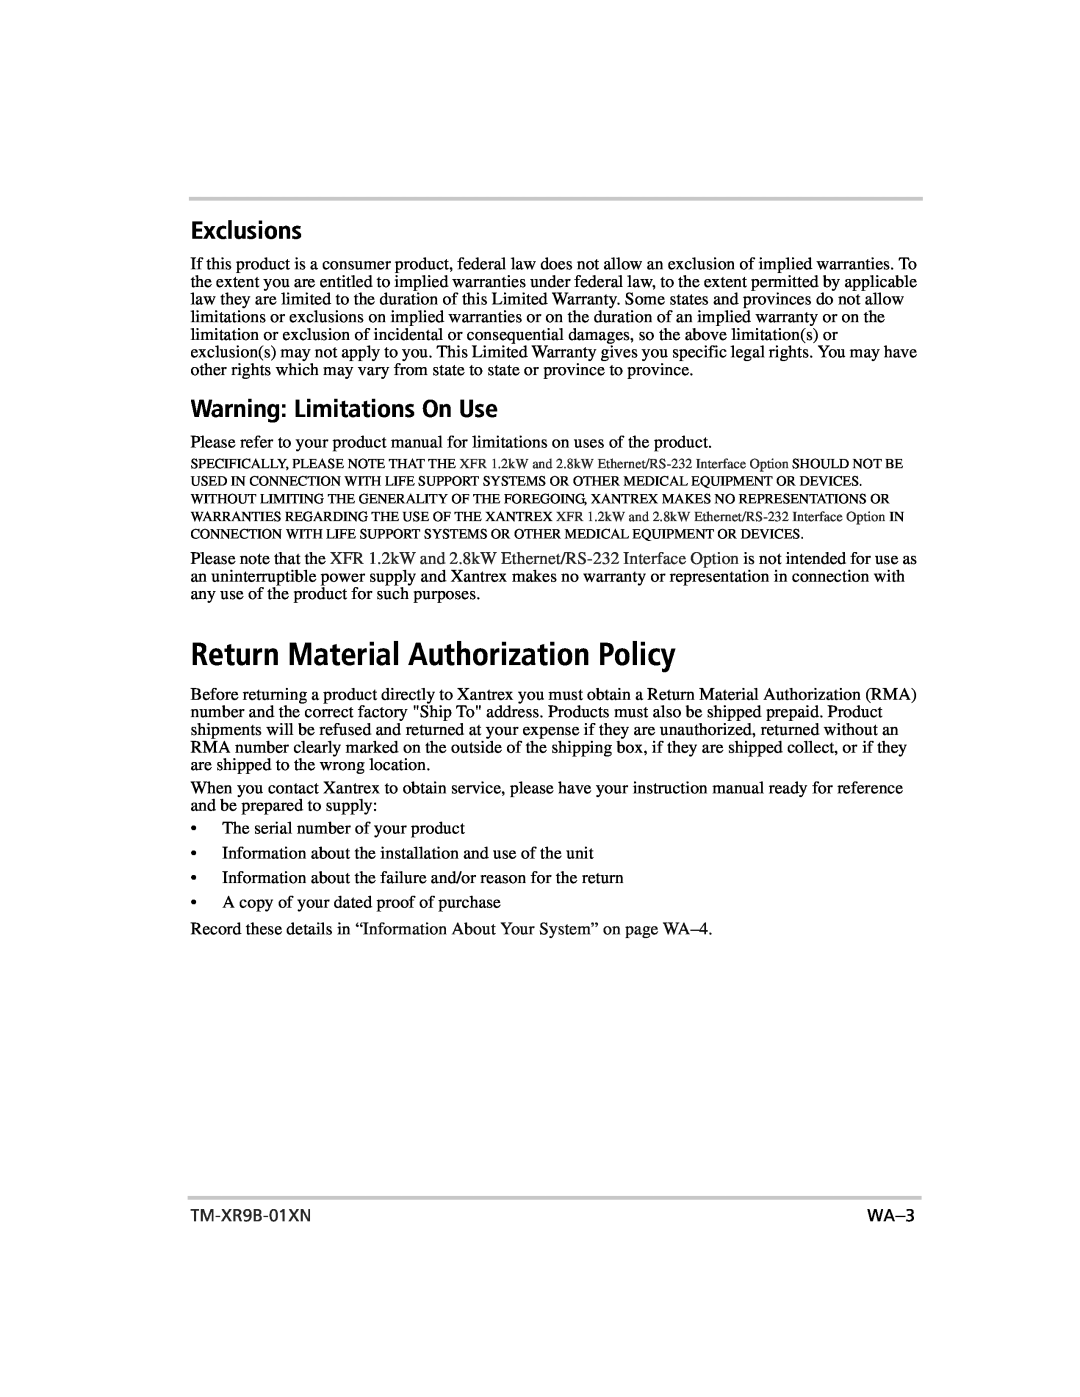 Xantrex Technology ENET-XFR Return Material Authorization Policy, Exclusions, Warning Limitations On Use, TM-XR9B-01XN 